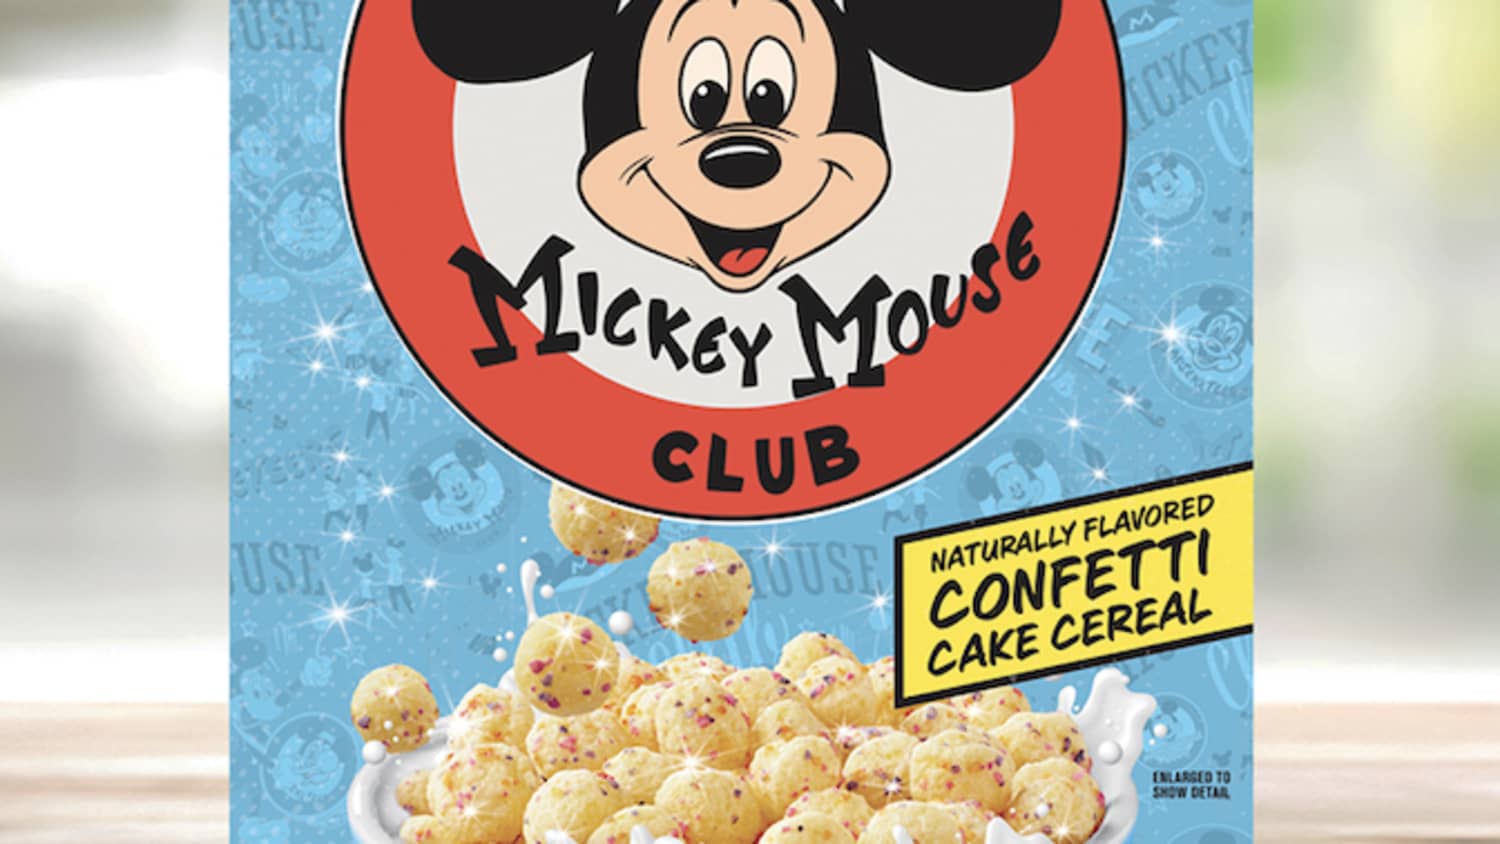 Disney Over Mickey Soup Cereal